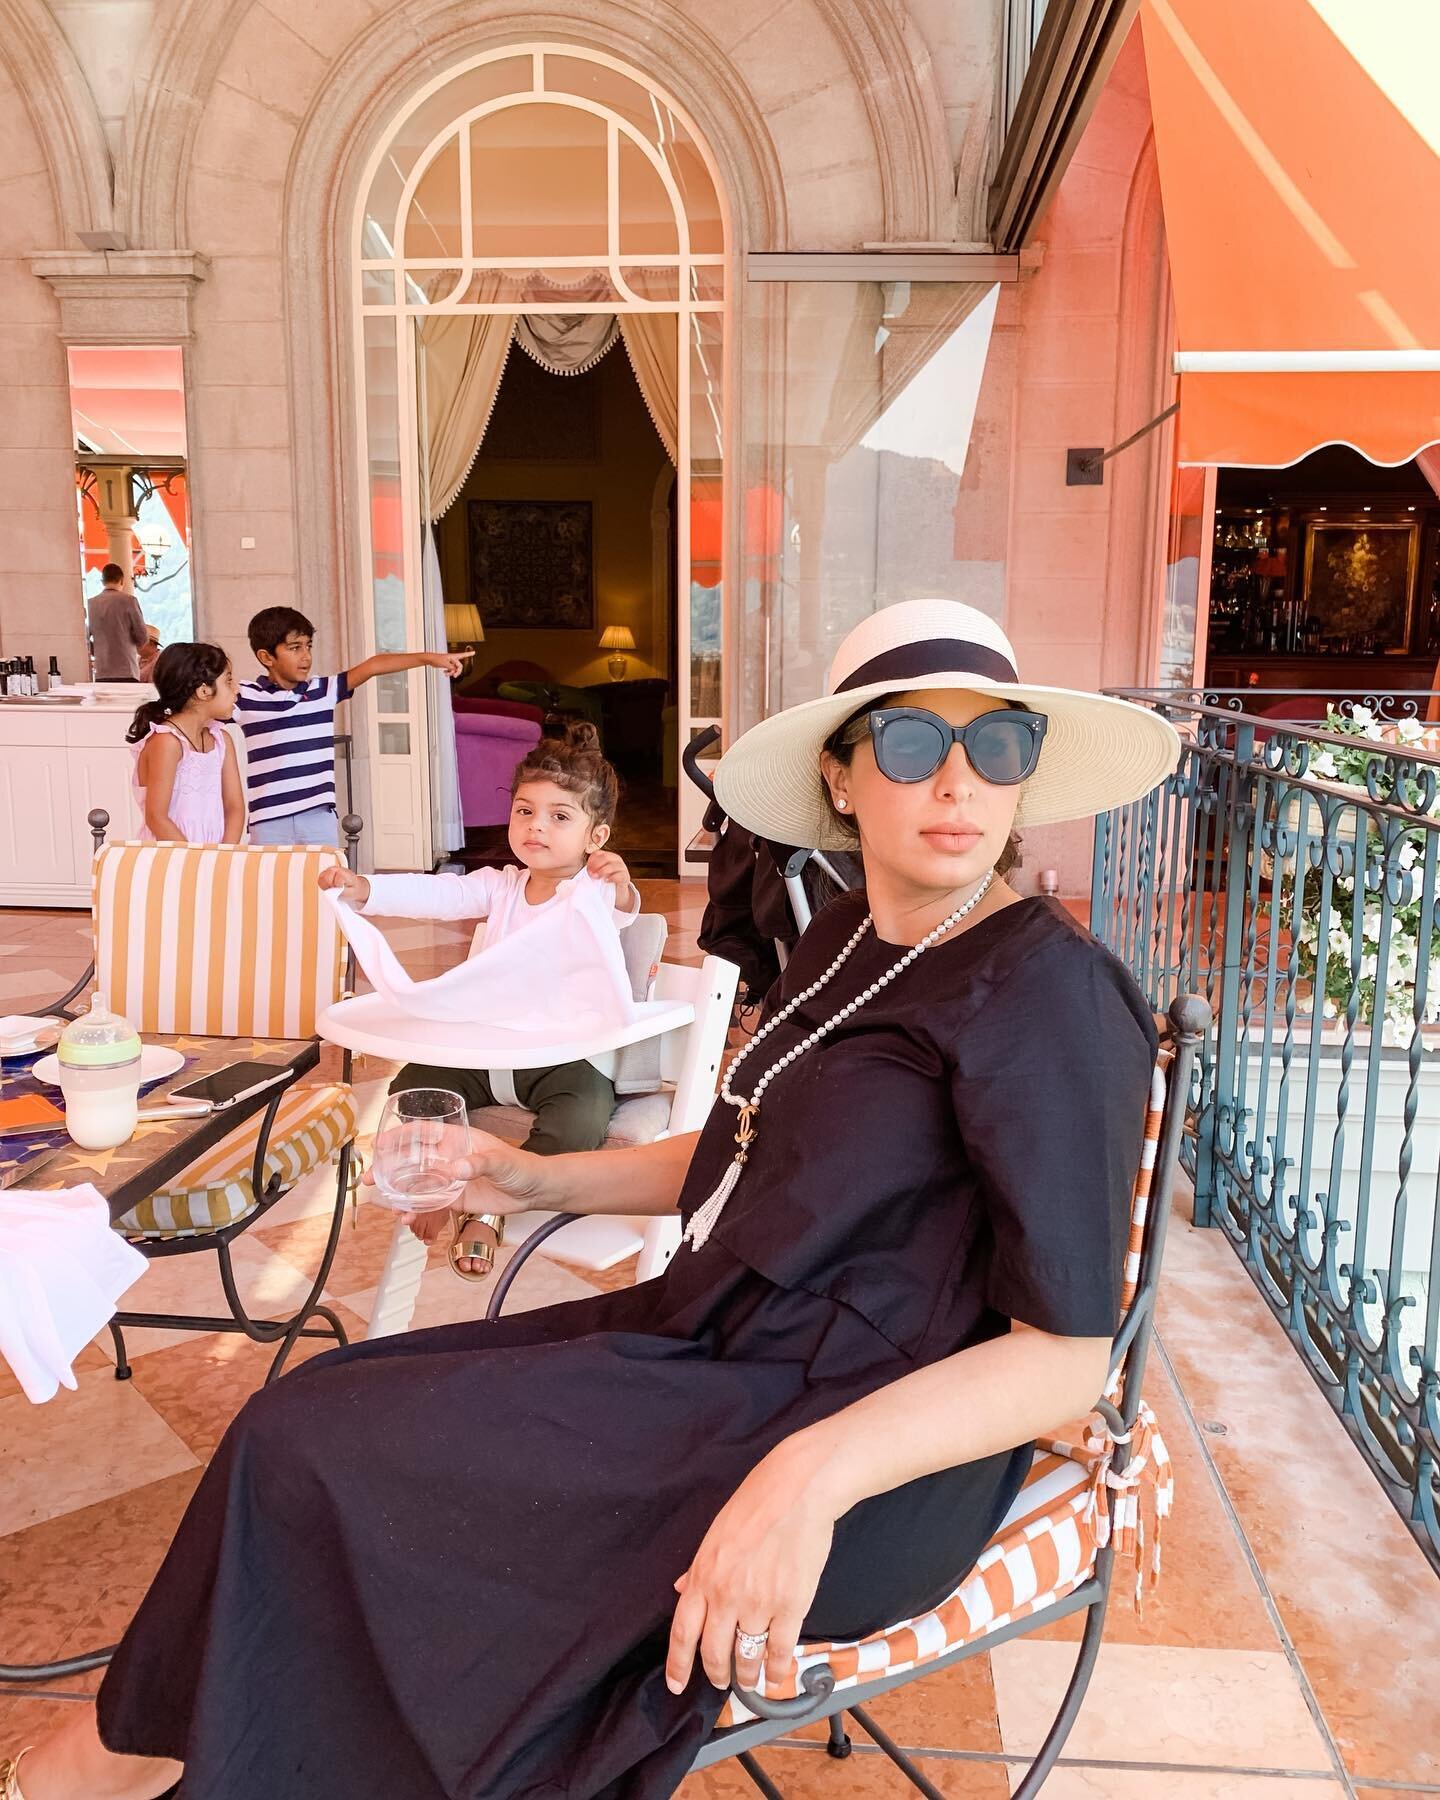 I happened upon this picture in my camera roll. A leisurely summer lunch at the Grand Hotel Tremezzo last summer&mdash; definitely a far cry from my current reality. Managing the zoom distance learning schedules of 2 kiddos while trying to work too. 